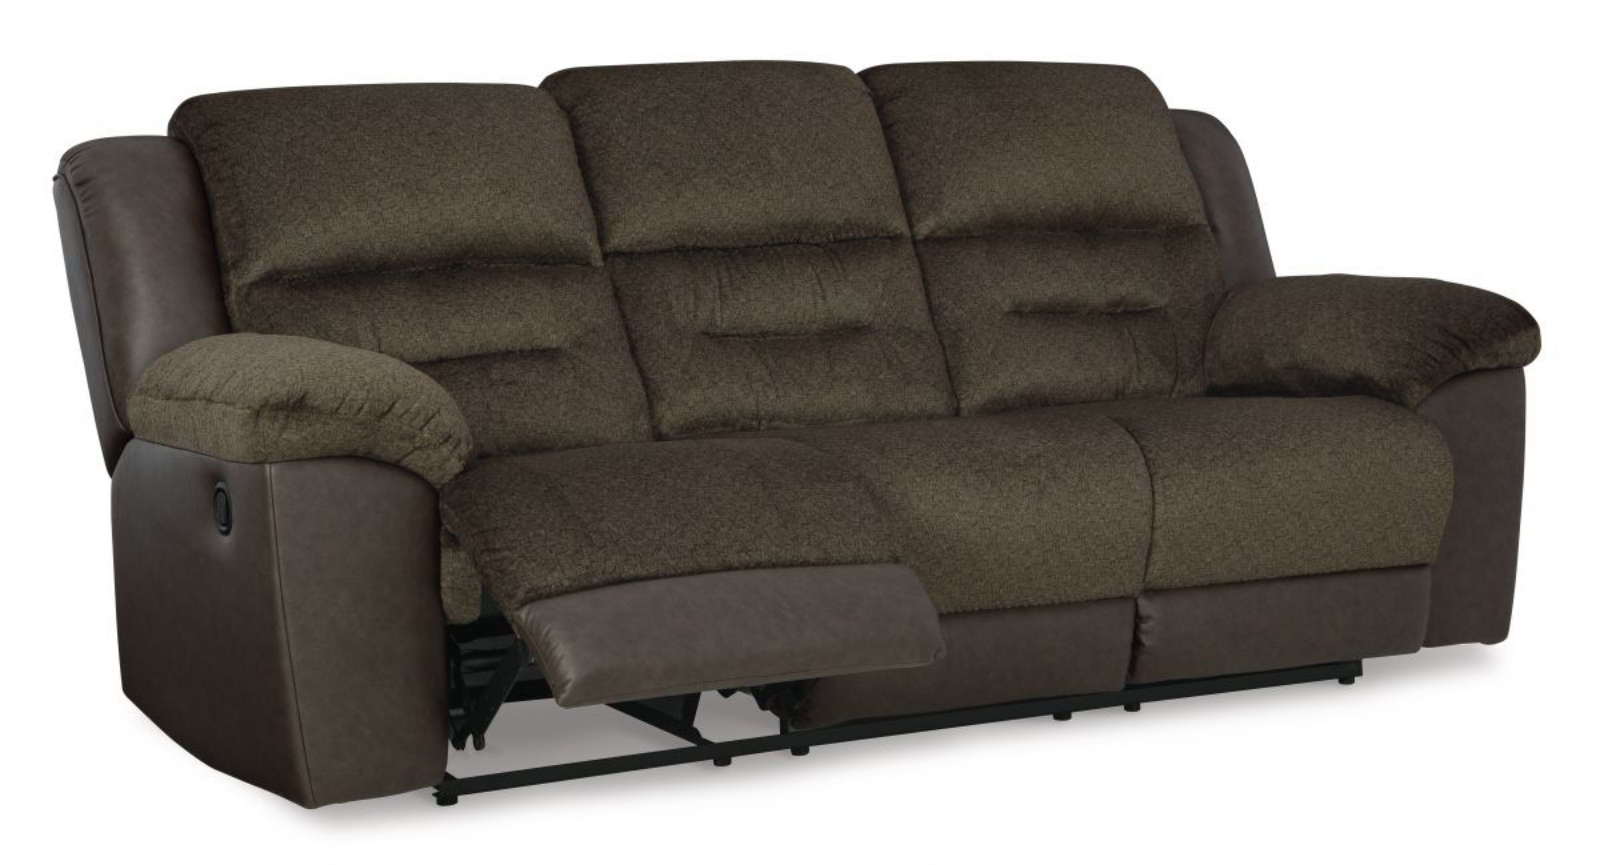 Picture of Dorman Reclining Sofa